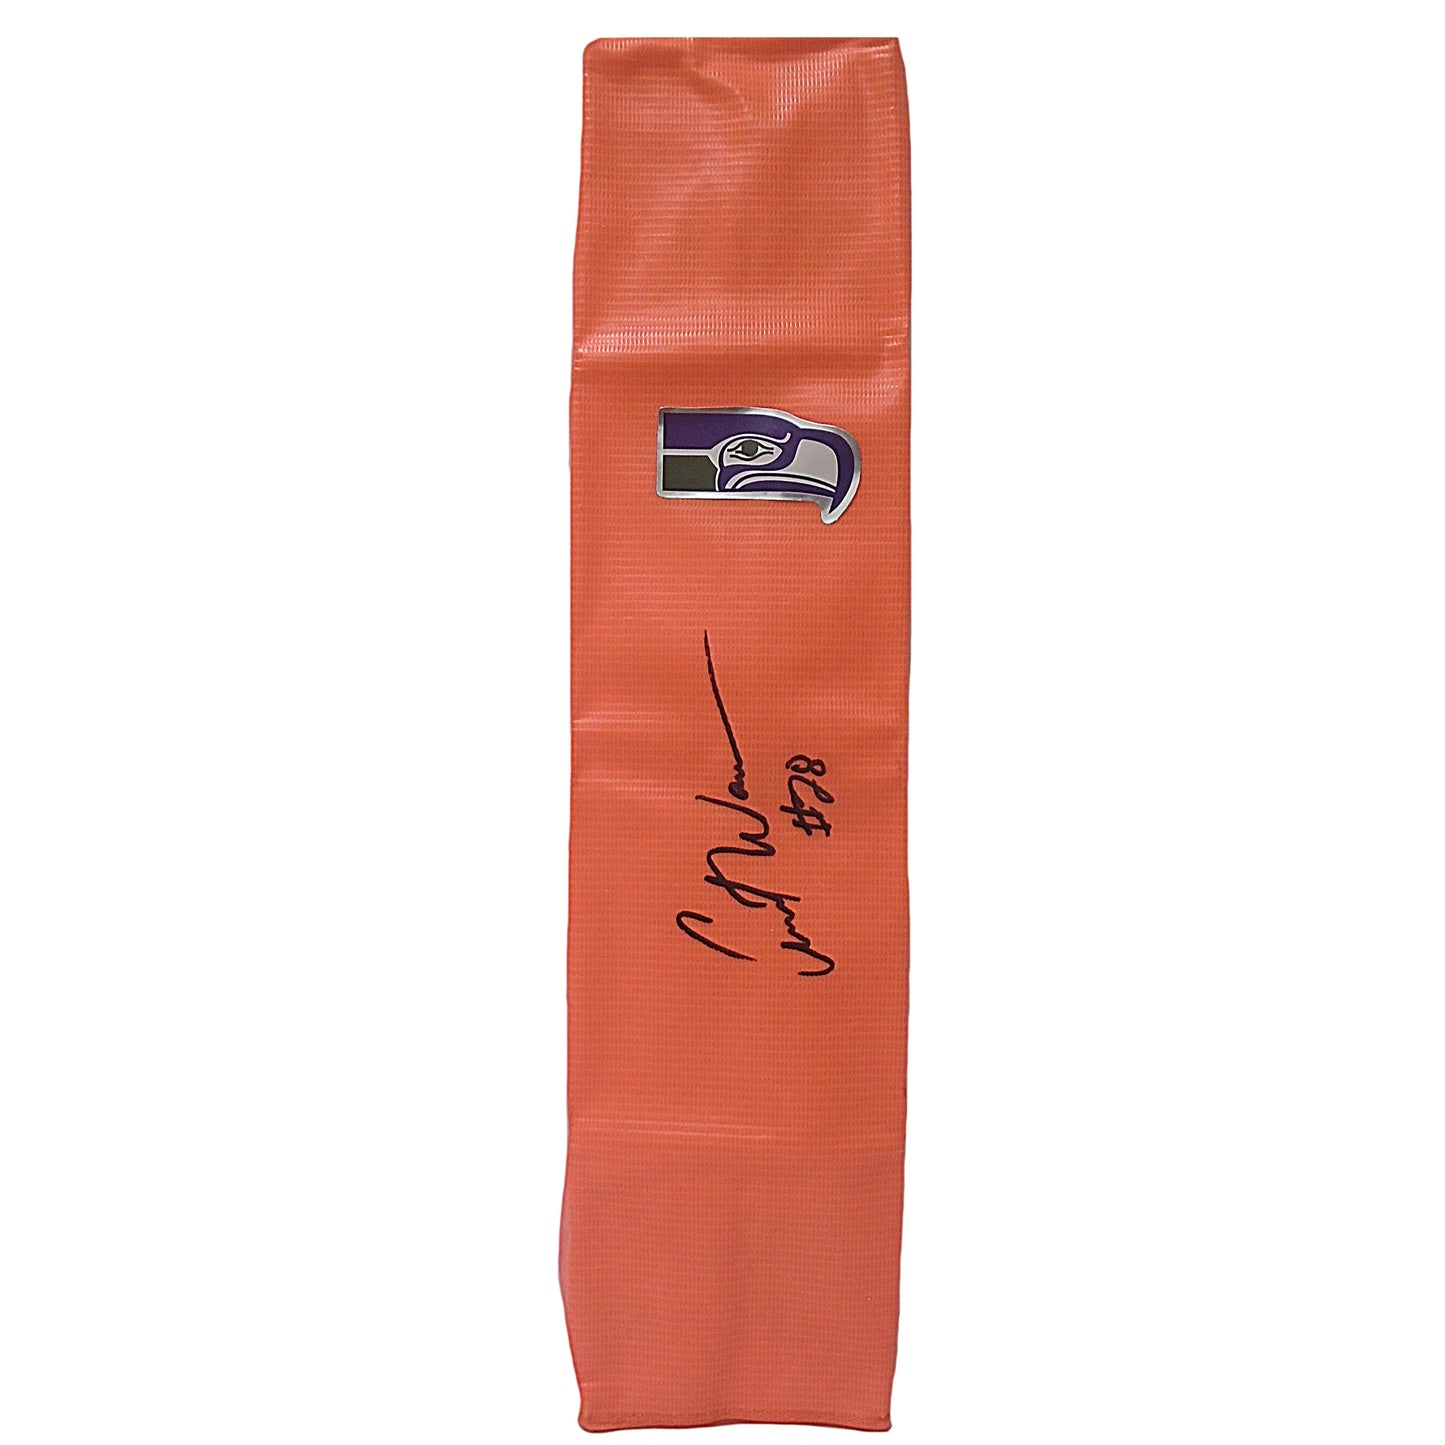 Football End Zone Pylons-Autographed - Curt Warner Signed Seattle Seahawks Football TD Pylon - Proof Photo - Beckett BAS Authentication 102